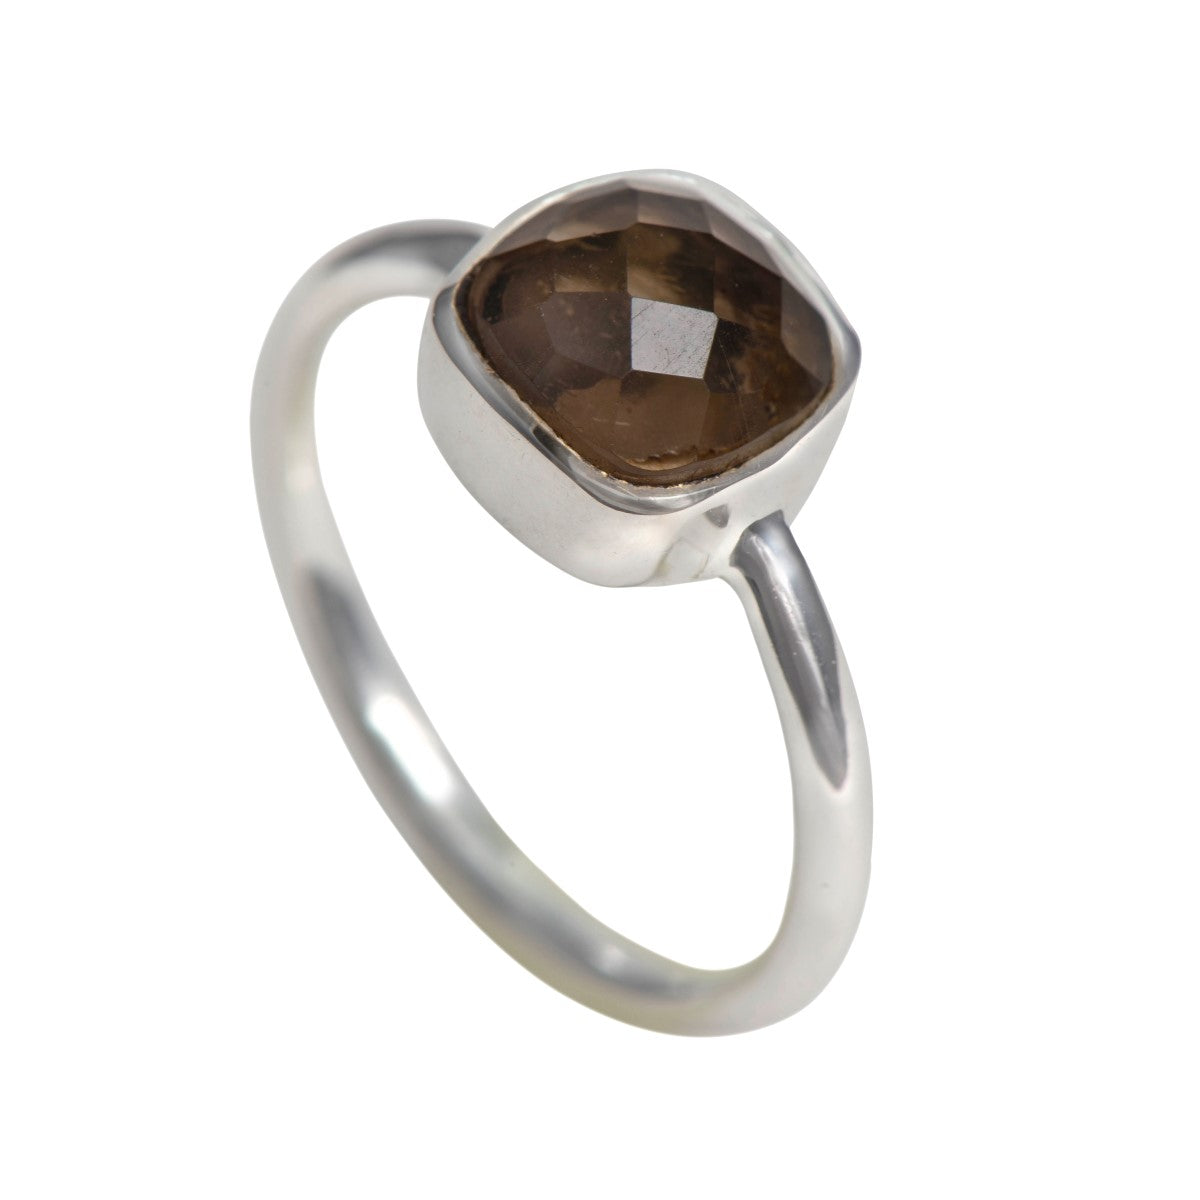 Faceted Square Cut Natural Gemstone Sterling Silver Solitaire Ring - Smoky Quartz